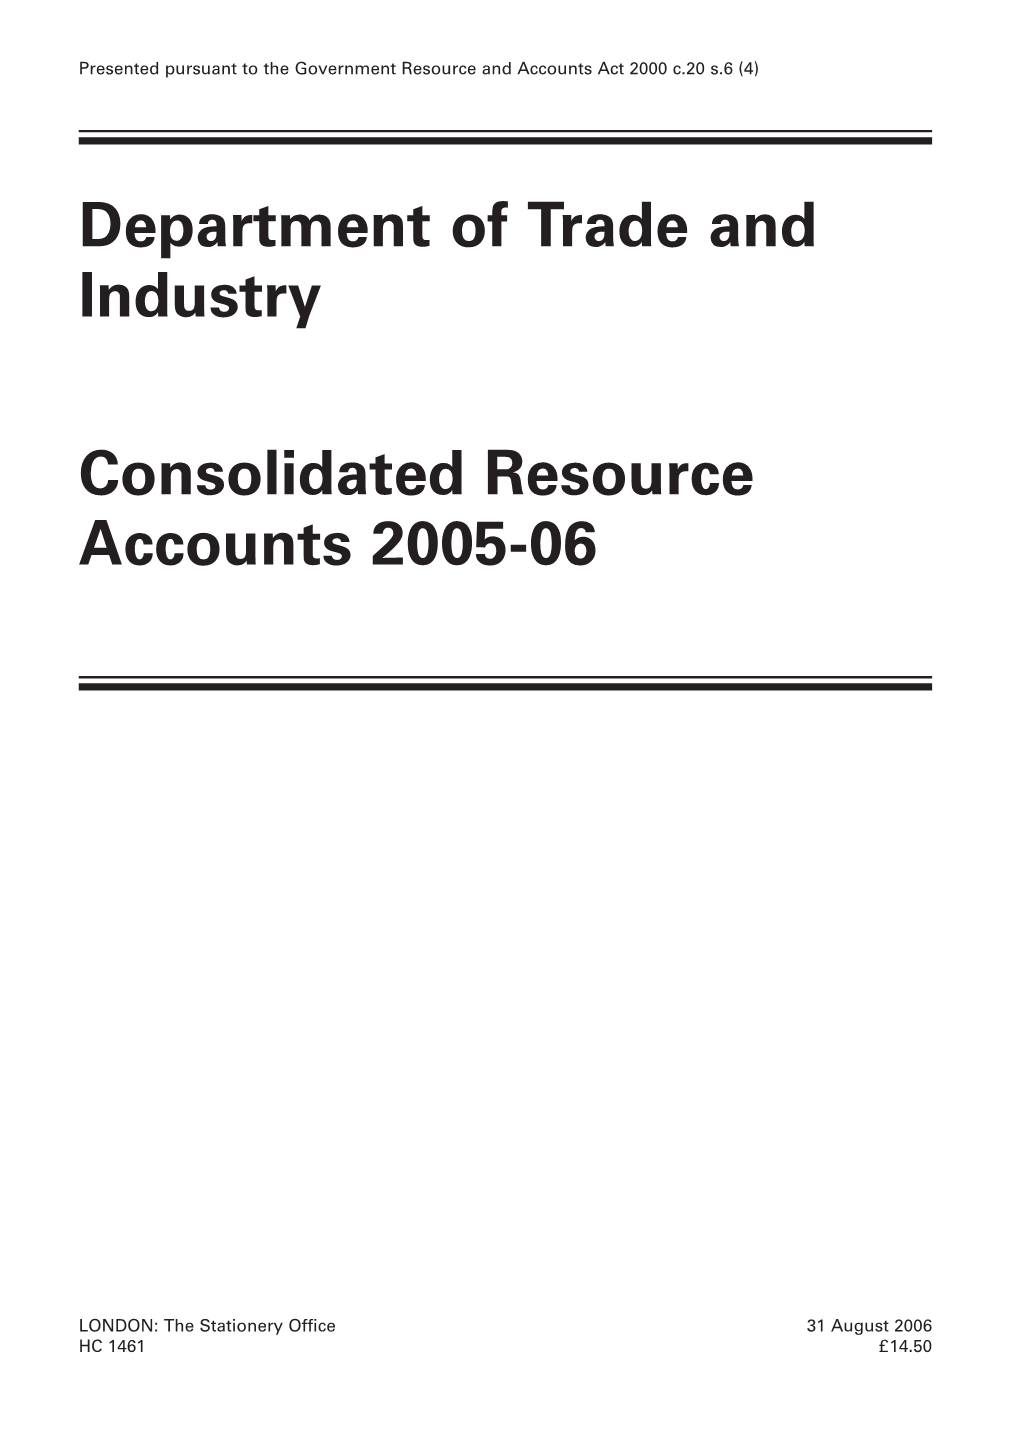 Department of Trade and Industry Consolidated Resource Accounts 2005-06